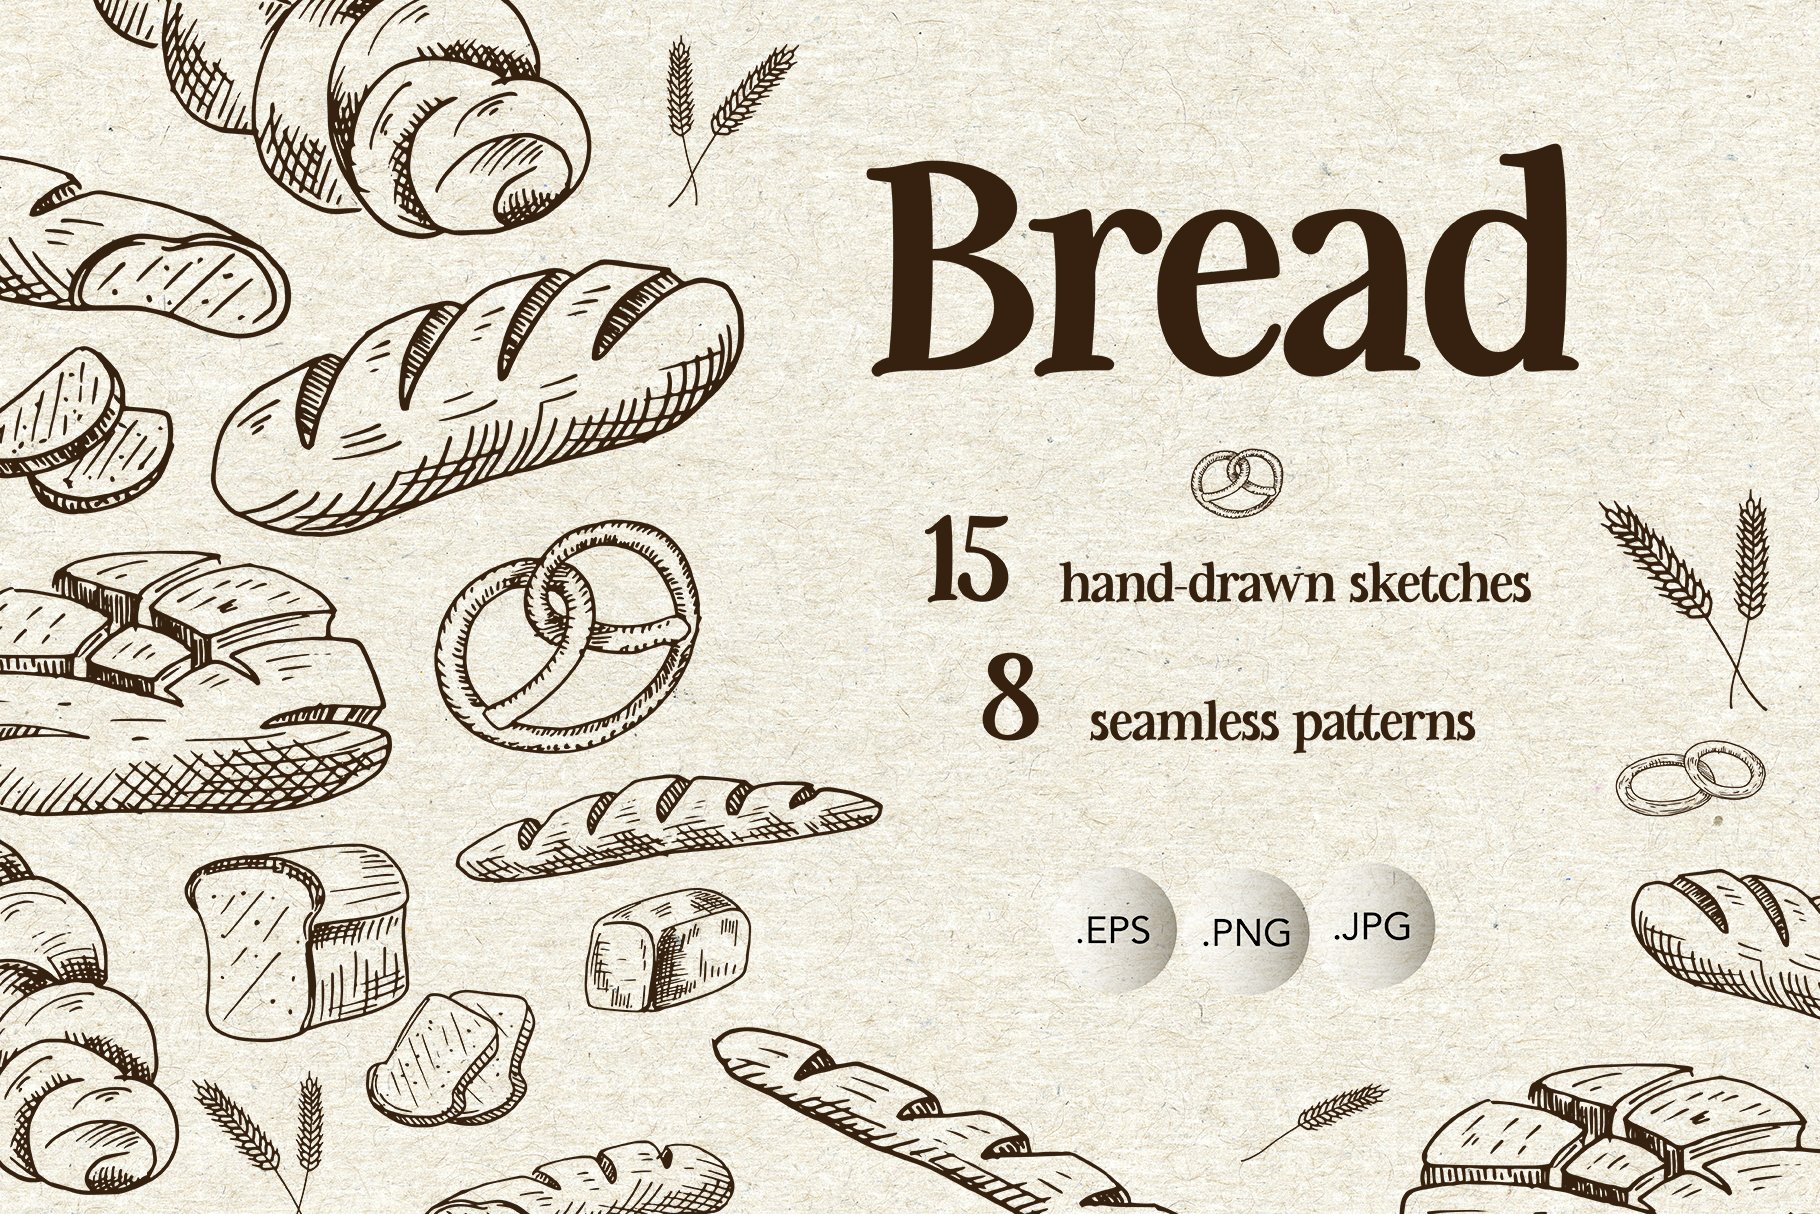 Bread. Sketches and patterns cover image.